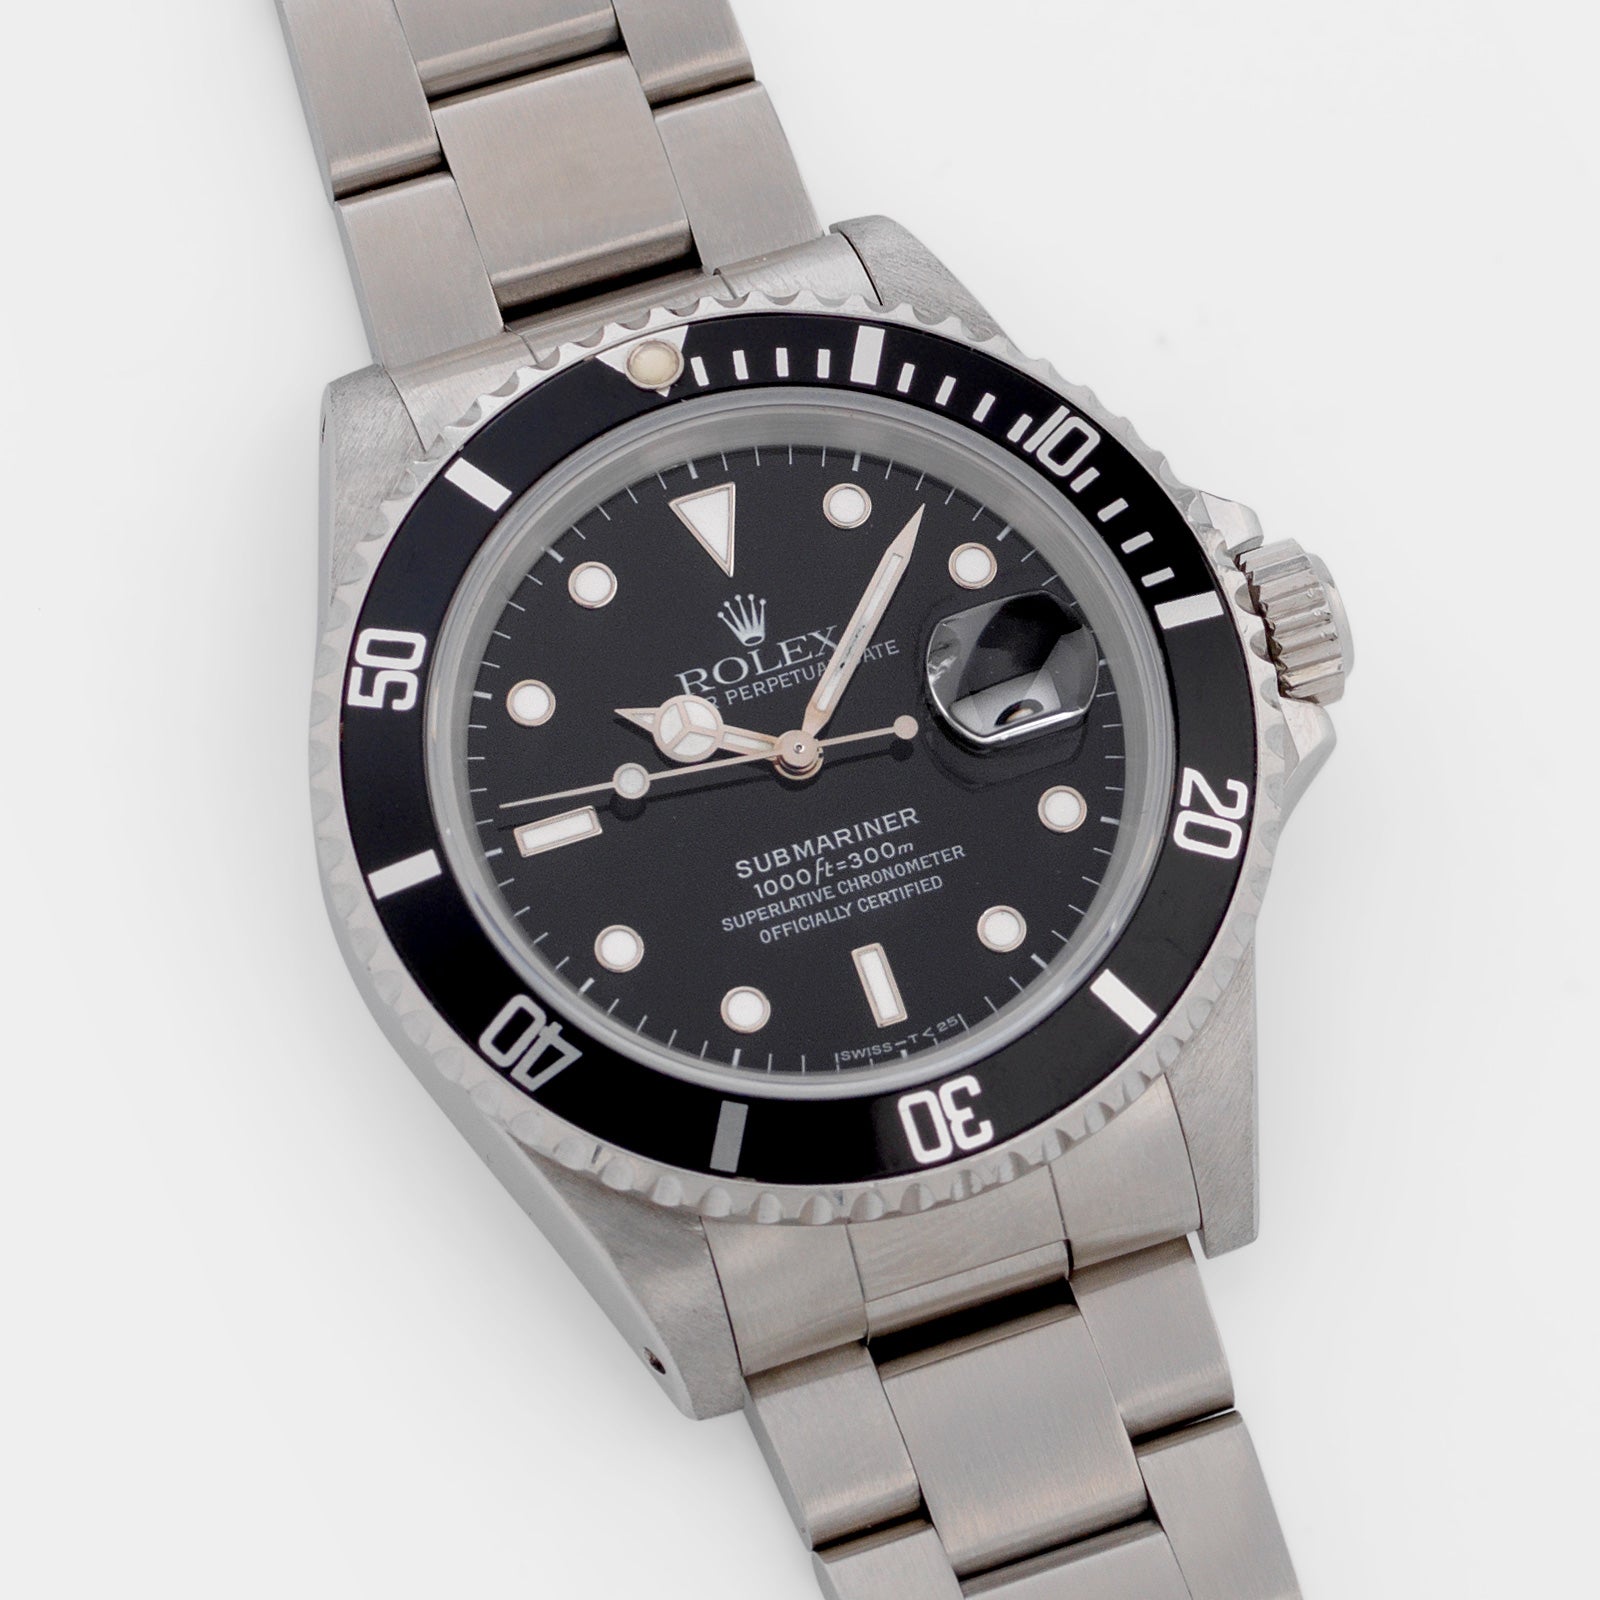 Rolex Submariner Date Reference 16610 with Box and Papers